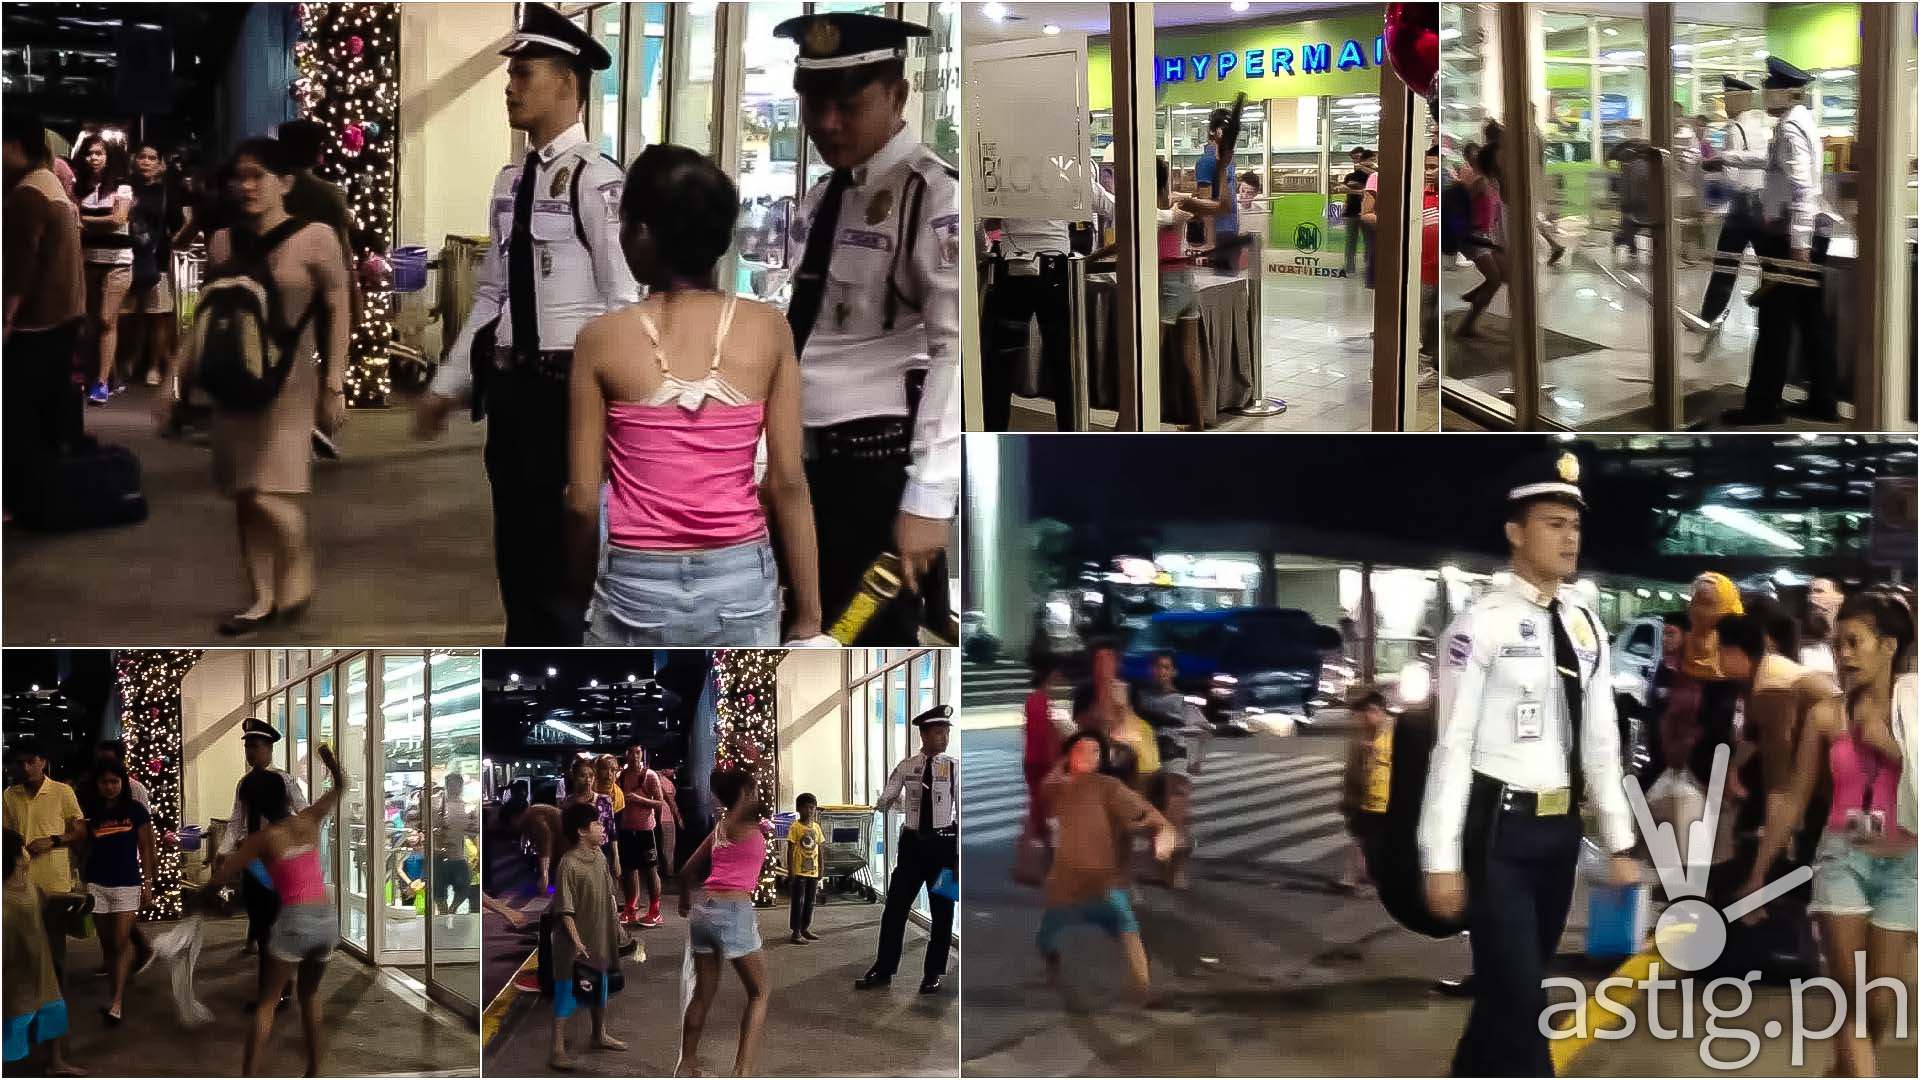 Street Kids harass and beat up mall guards